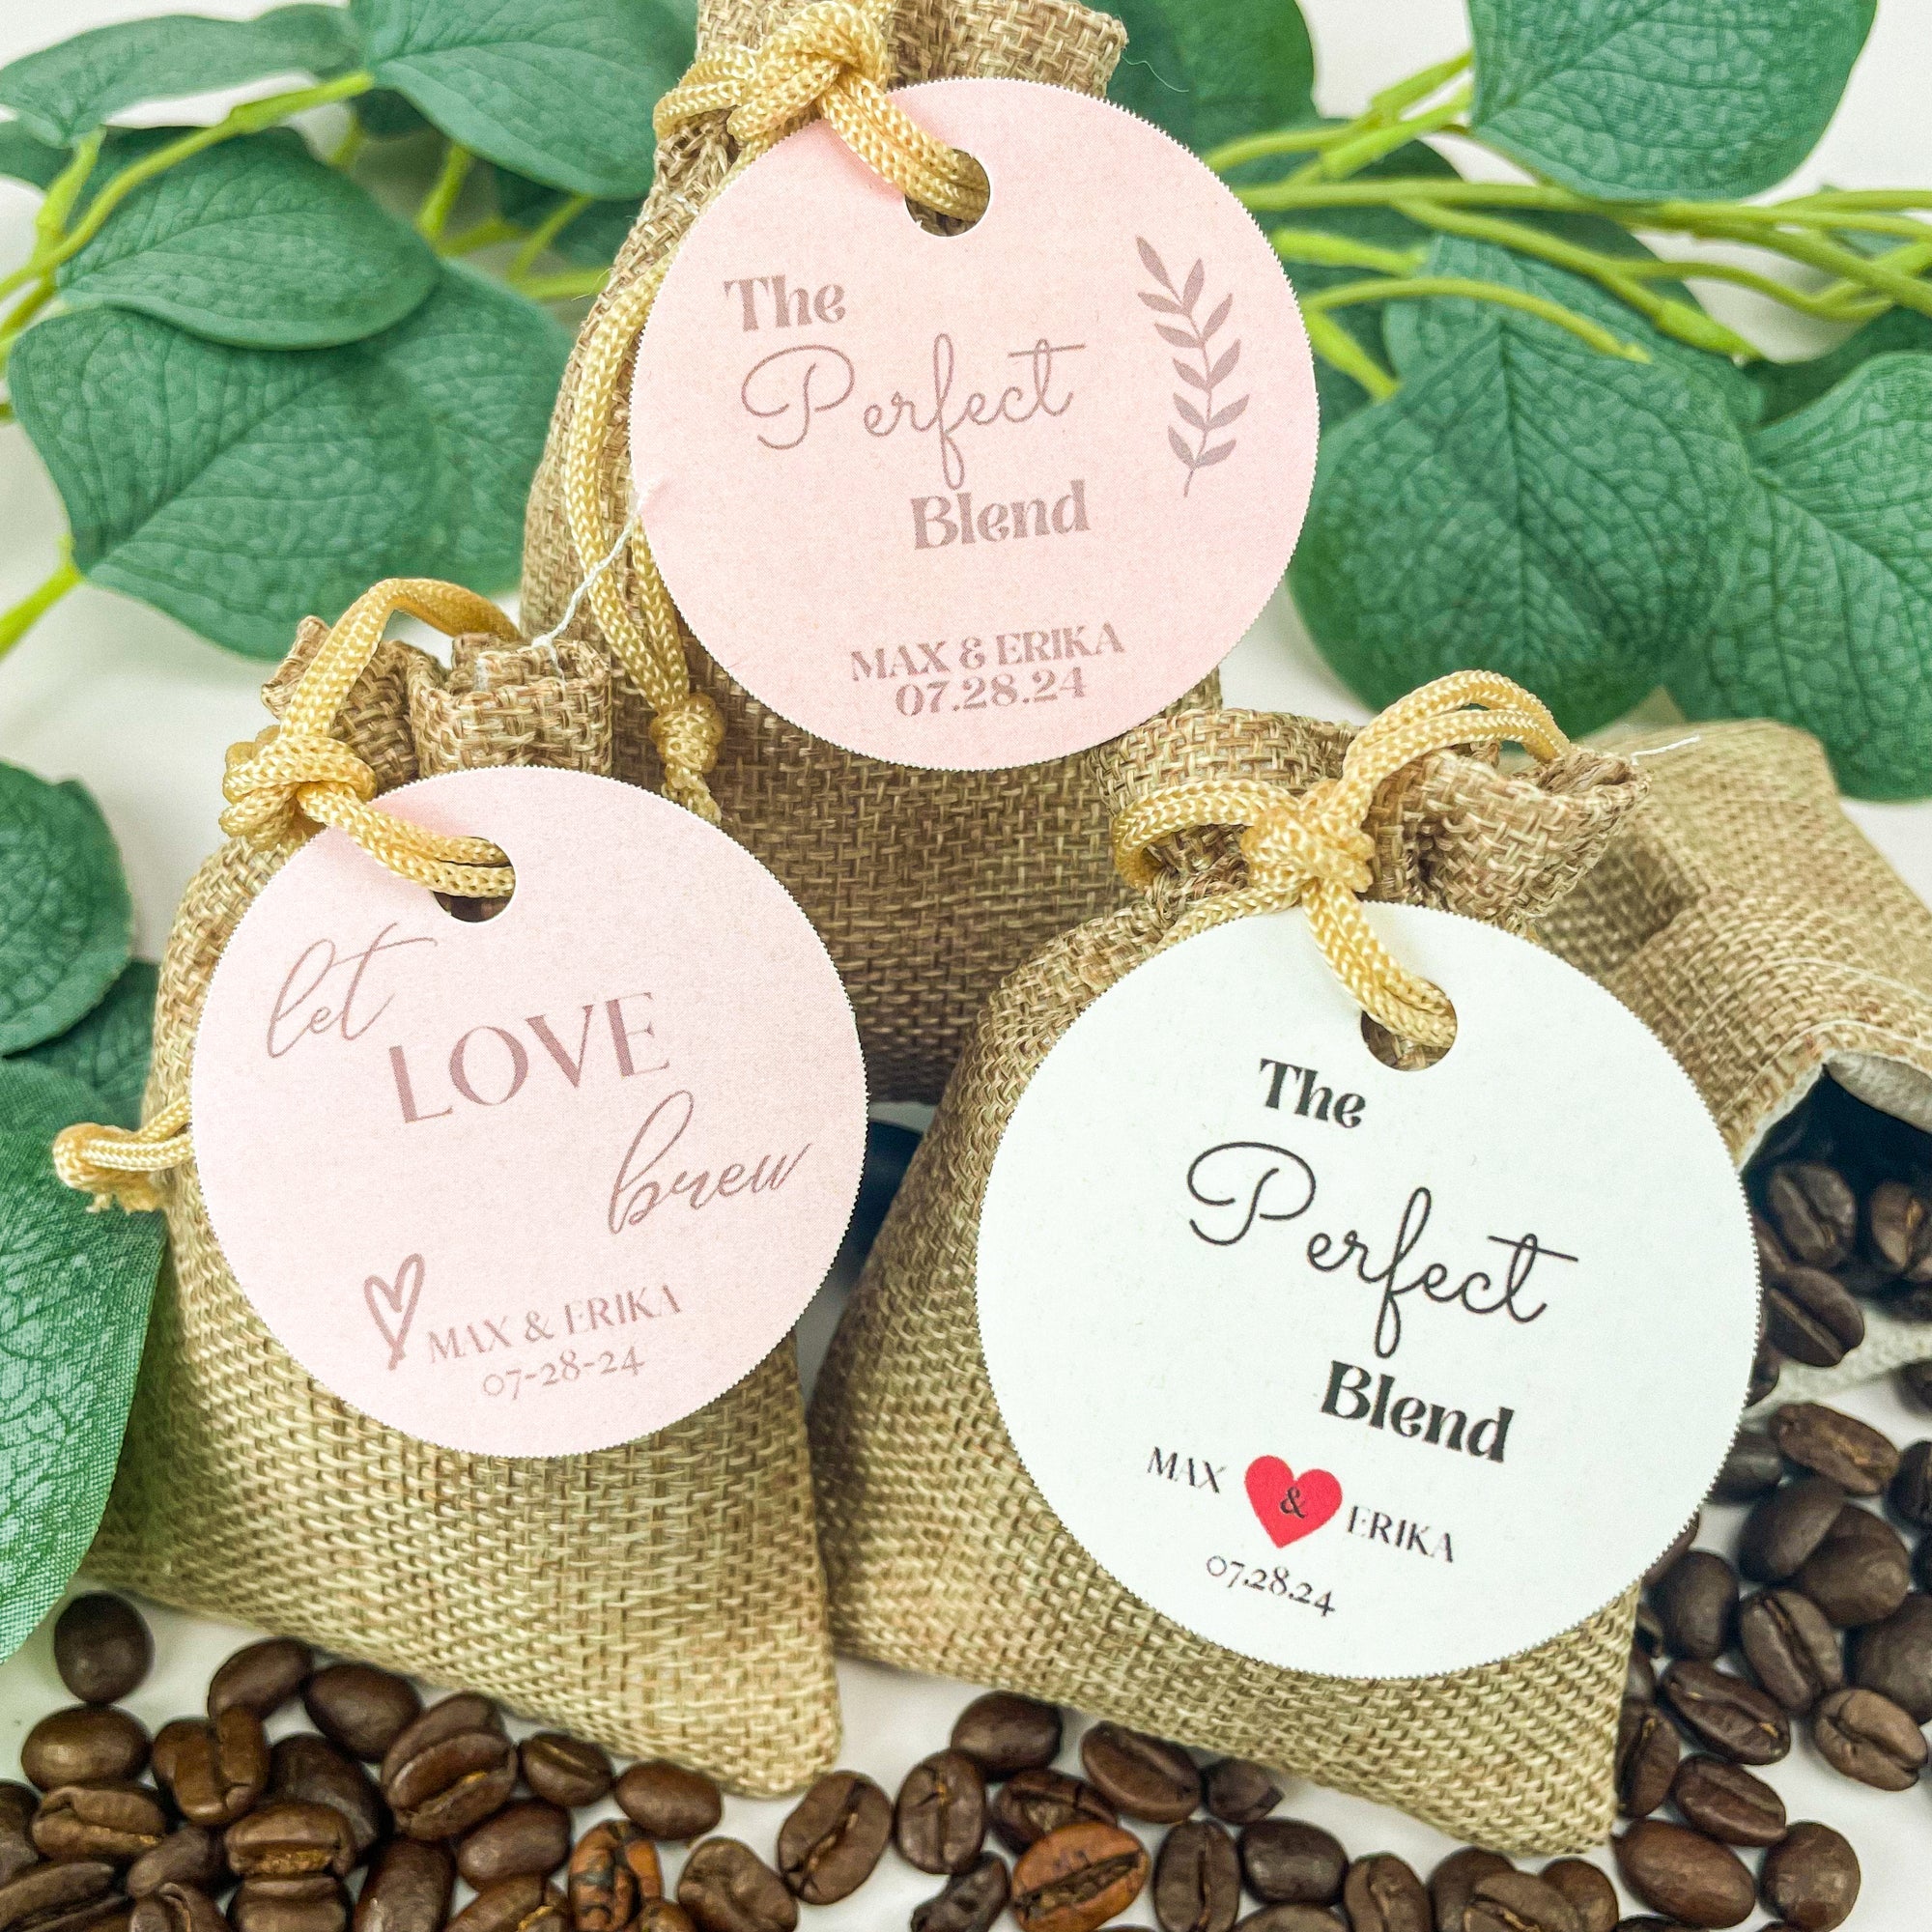 42 Rustic Wedding Favors That Will Make Your Guests Swoon - Forever Wedding Favors